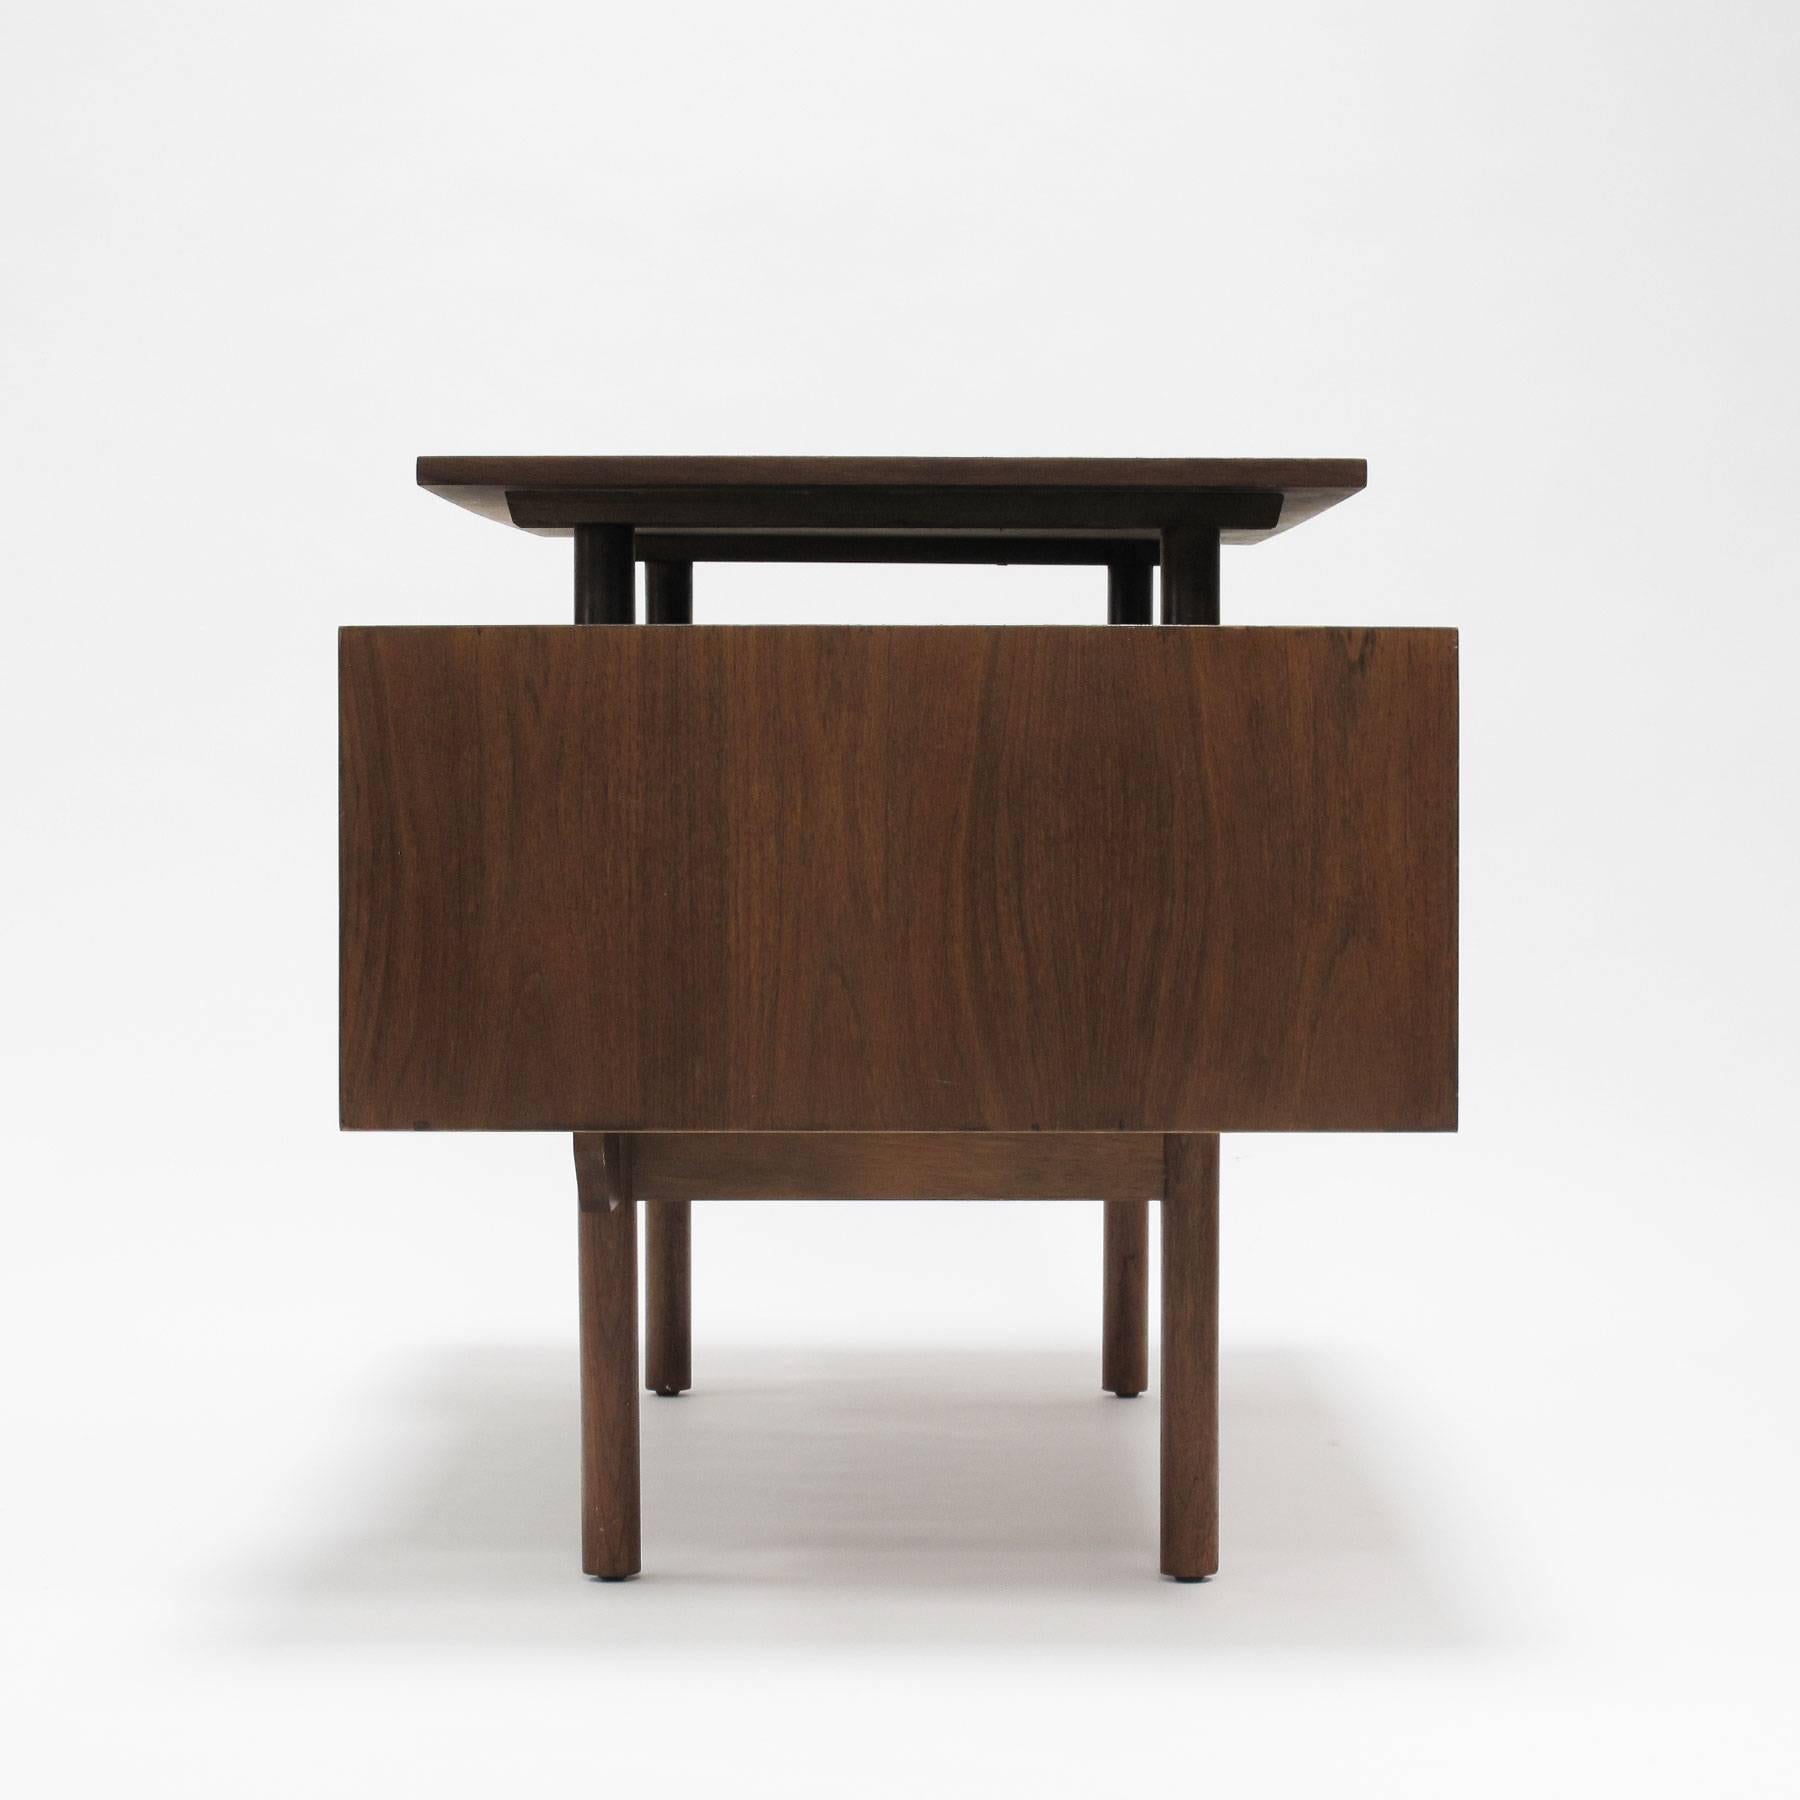 Wood Milo Baughman Executive Desk with Floating Top, Glenn of California, 1950s For Sale